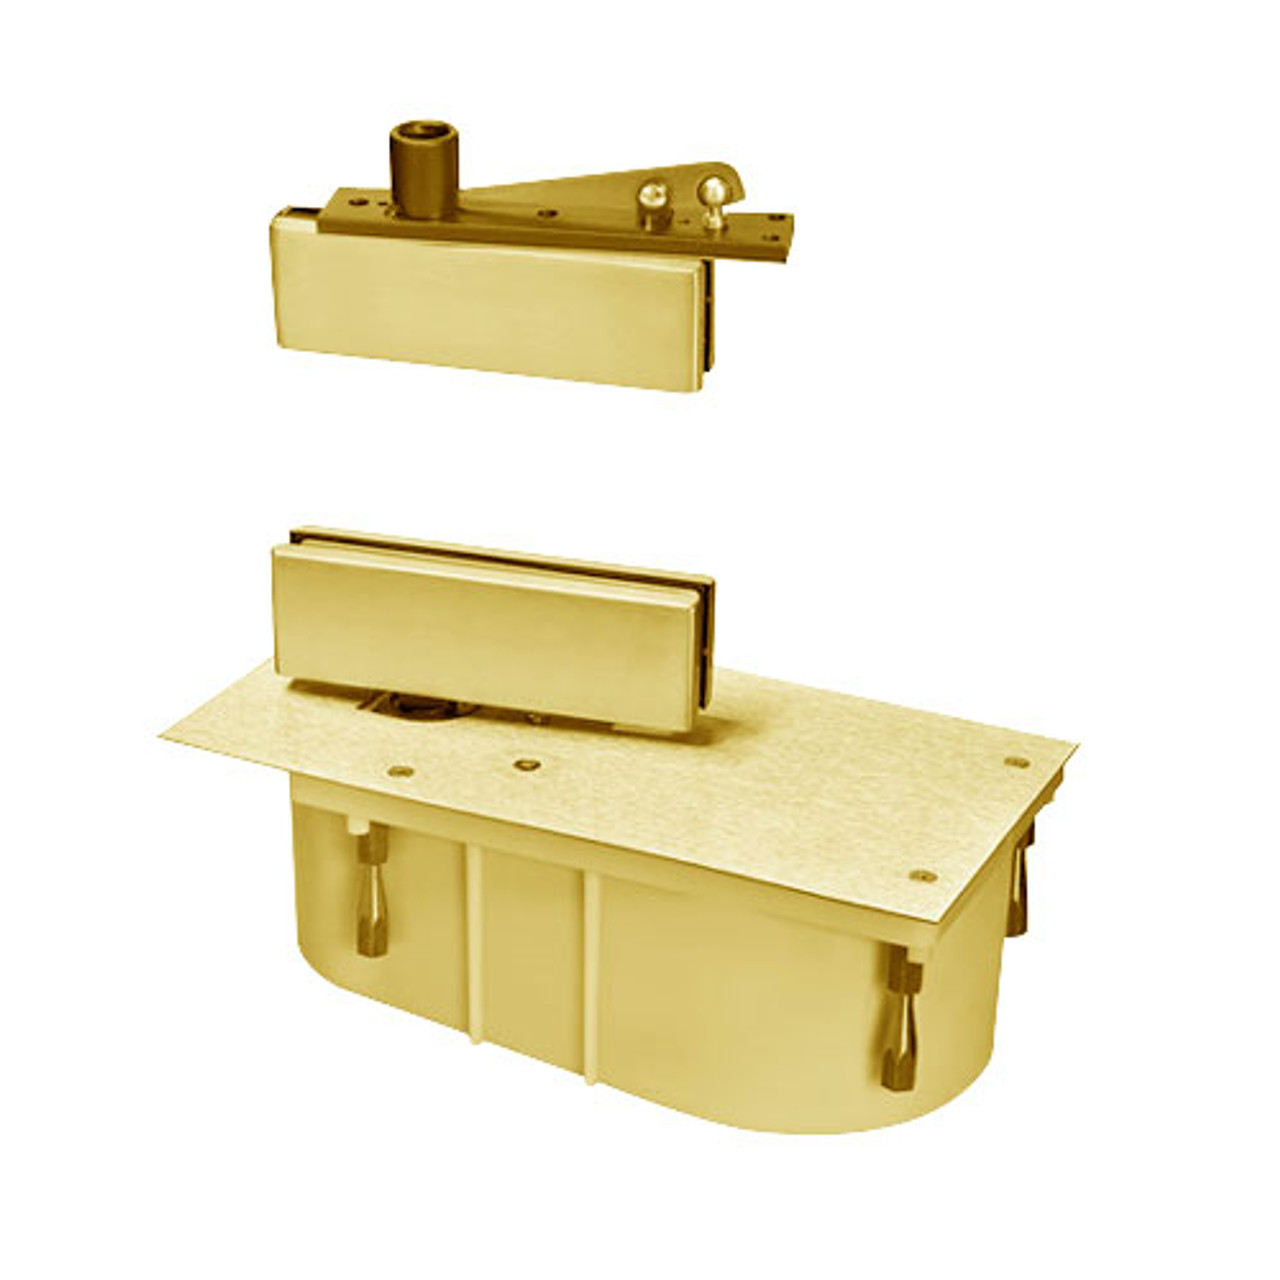 428-95N-LTP-LH-605 Rixson 428 Series Heavy Duty Single Acting Center Hung Floor Closer with Patch Fittings in Bright Brass Finish